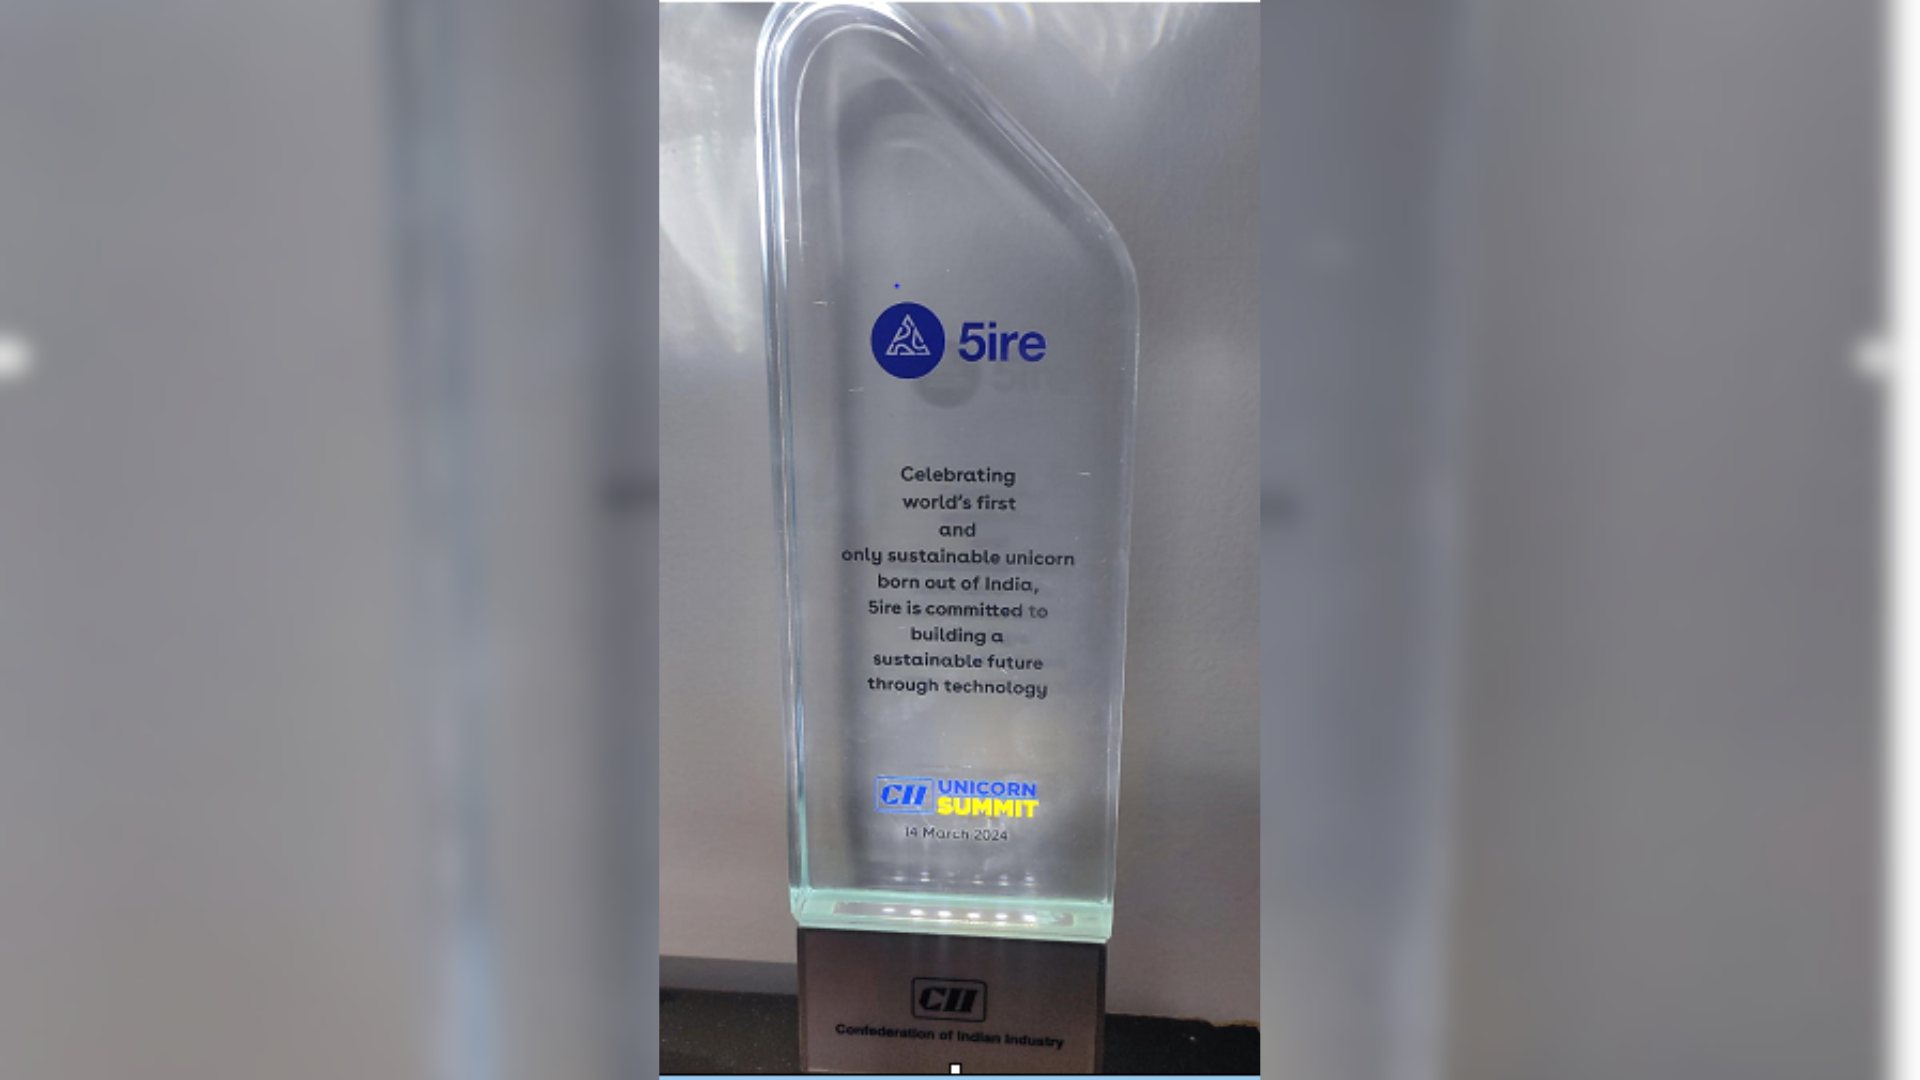 5ire Honored with “New Unicorn of the Year” Award at CII Unicorn Summit